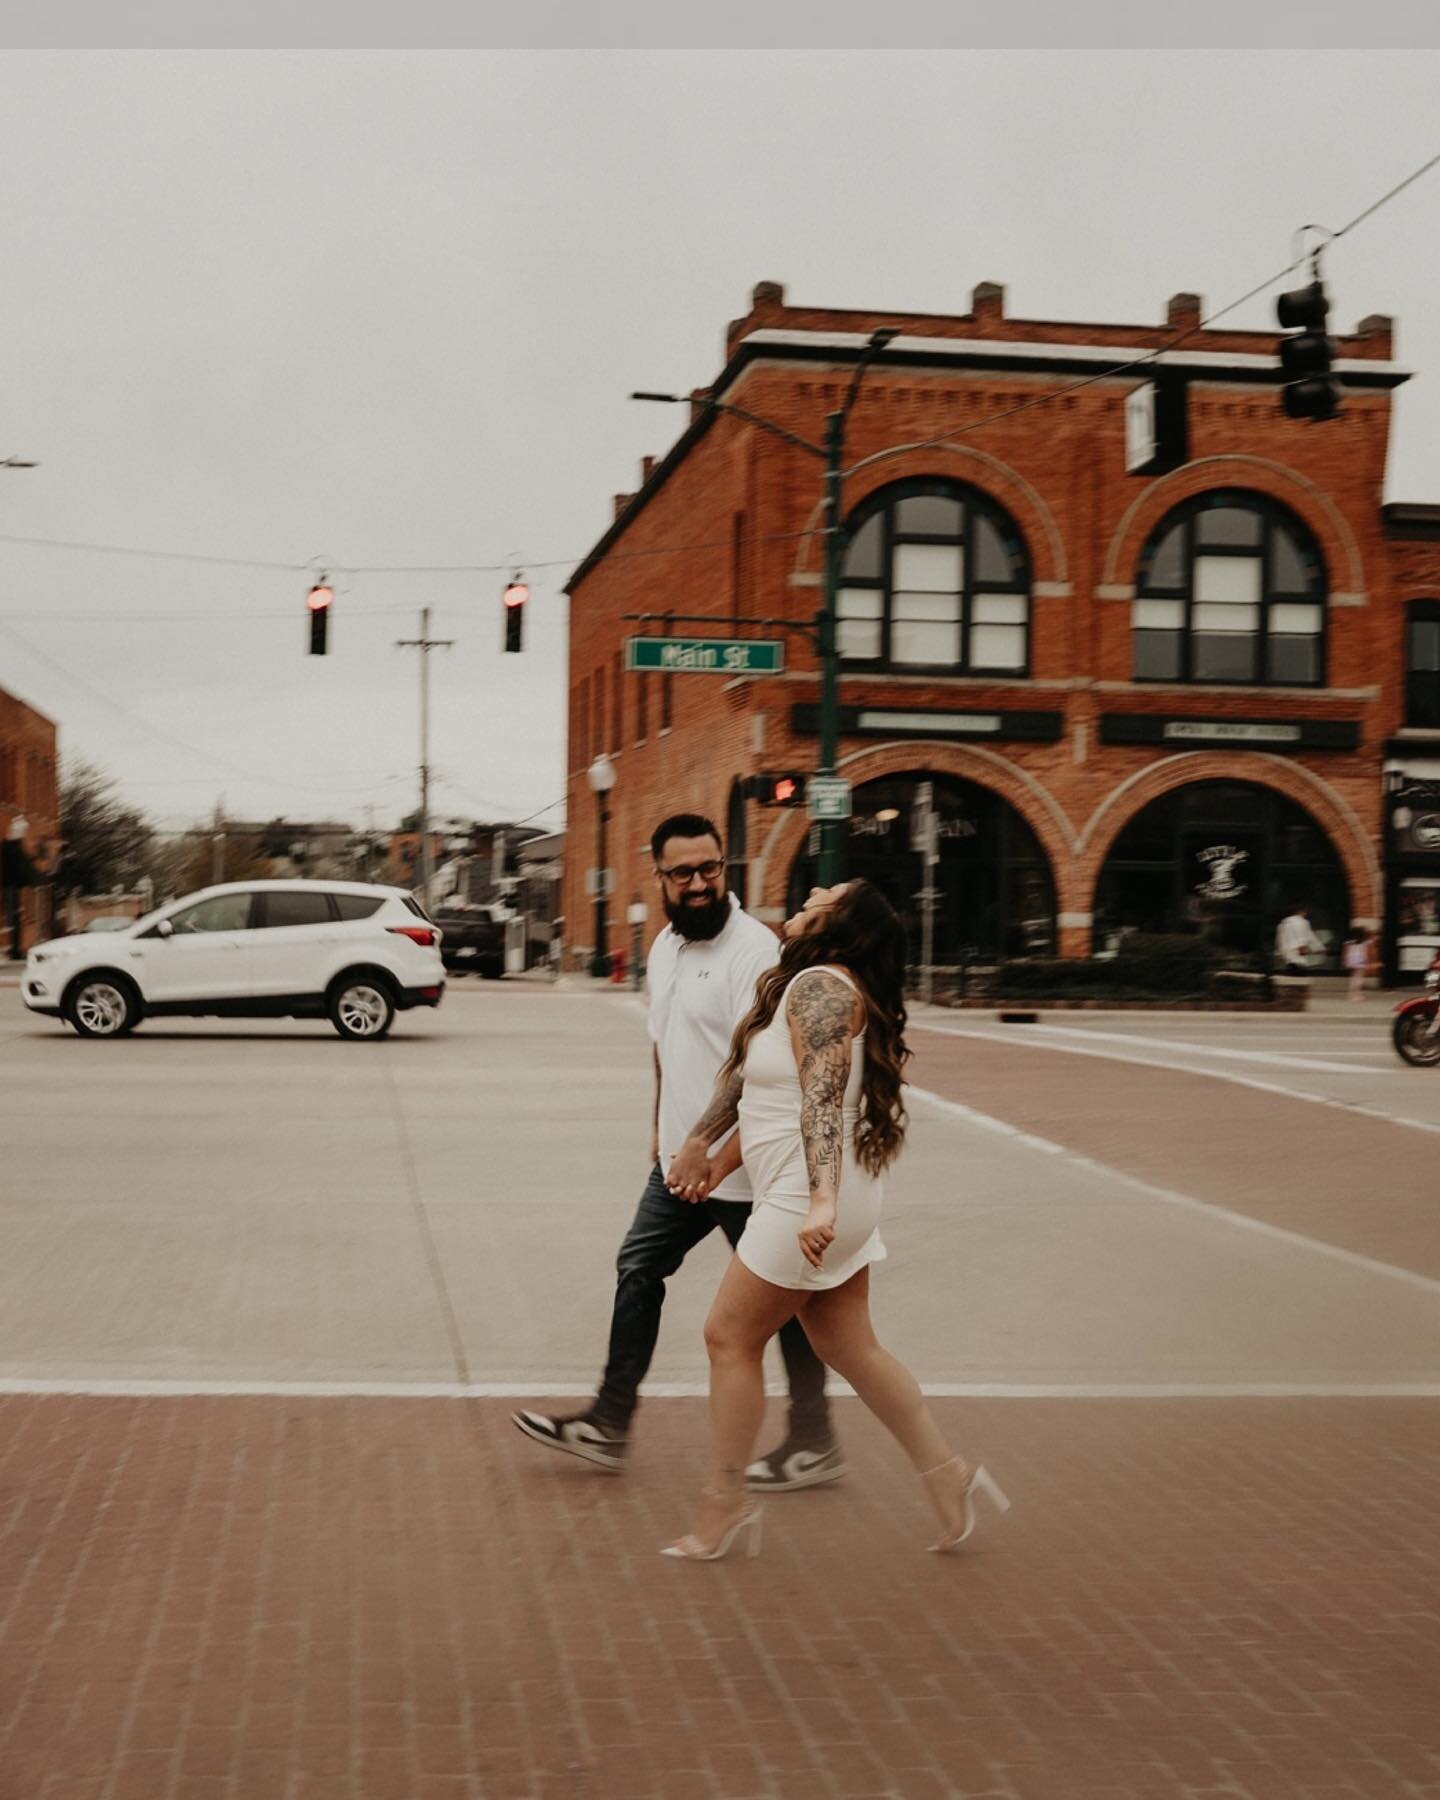 It&rsquo;s so hard to keep my cool and not post every photo right after each session!🖤
.
Cutest couple @kaitlynnbrown 
.
.
.

#michiganfamilyphotographer&nbsp;#metrodetroitphotographer&nbsp;#detroitphotographer&nbsp;#radcouples&nbsp;#emotionsurfers&